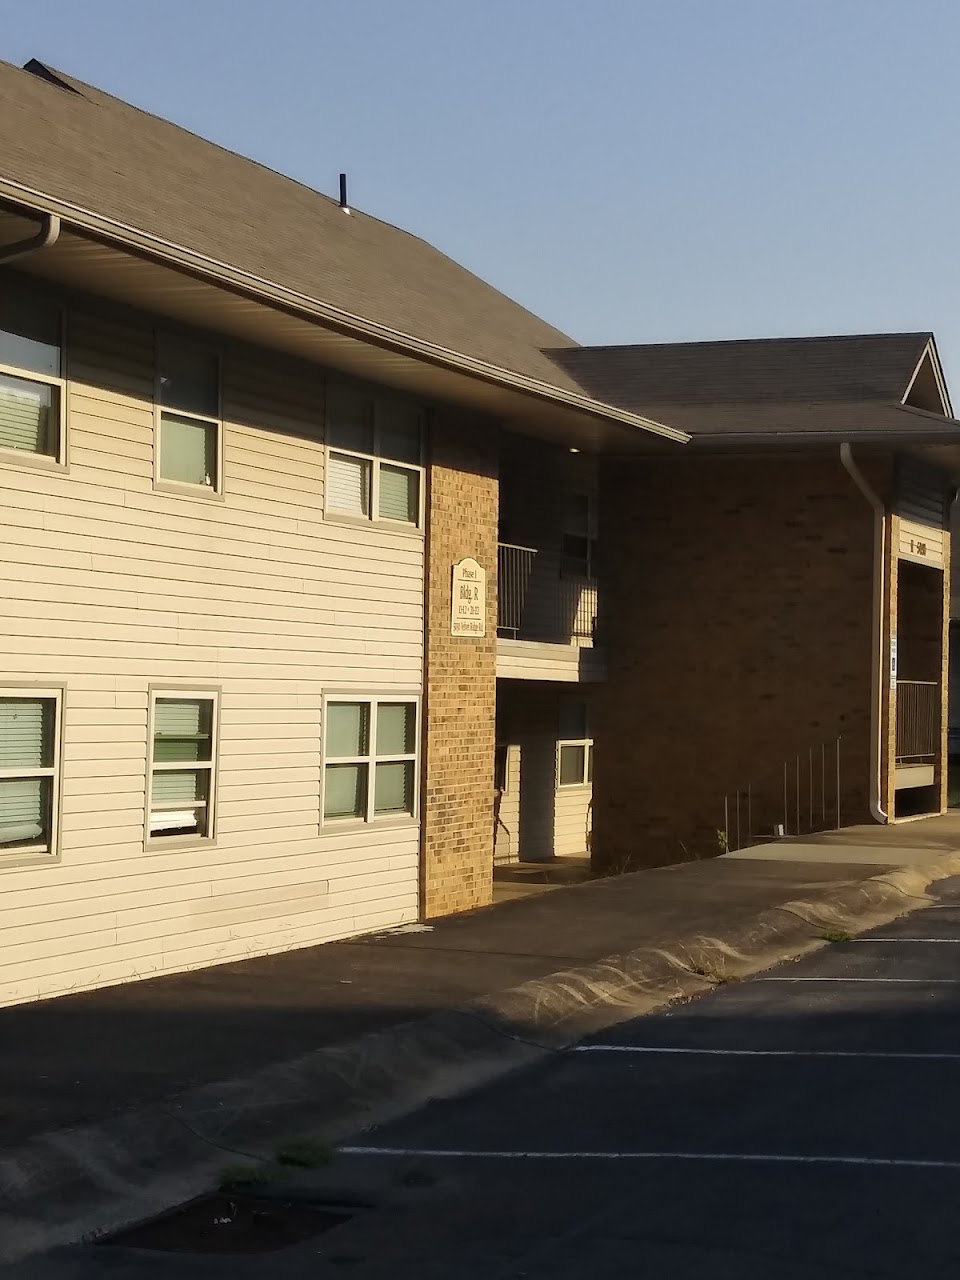 Photo of BLUFFS ON MCCAIN FKA RIDGECREST APARTMENTS. Affordable housing located at 431 MCCAIN BLVD NORTH LITTLE ROCK, AR 72116